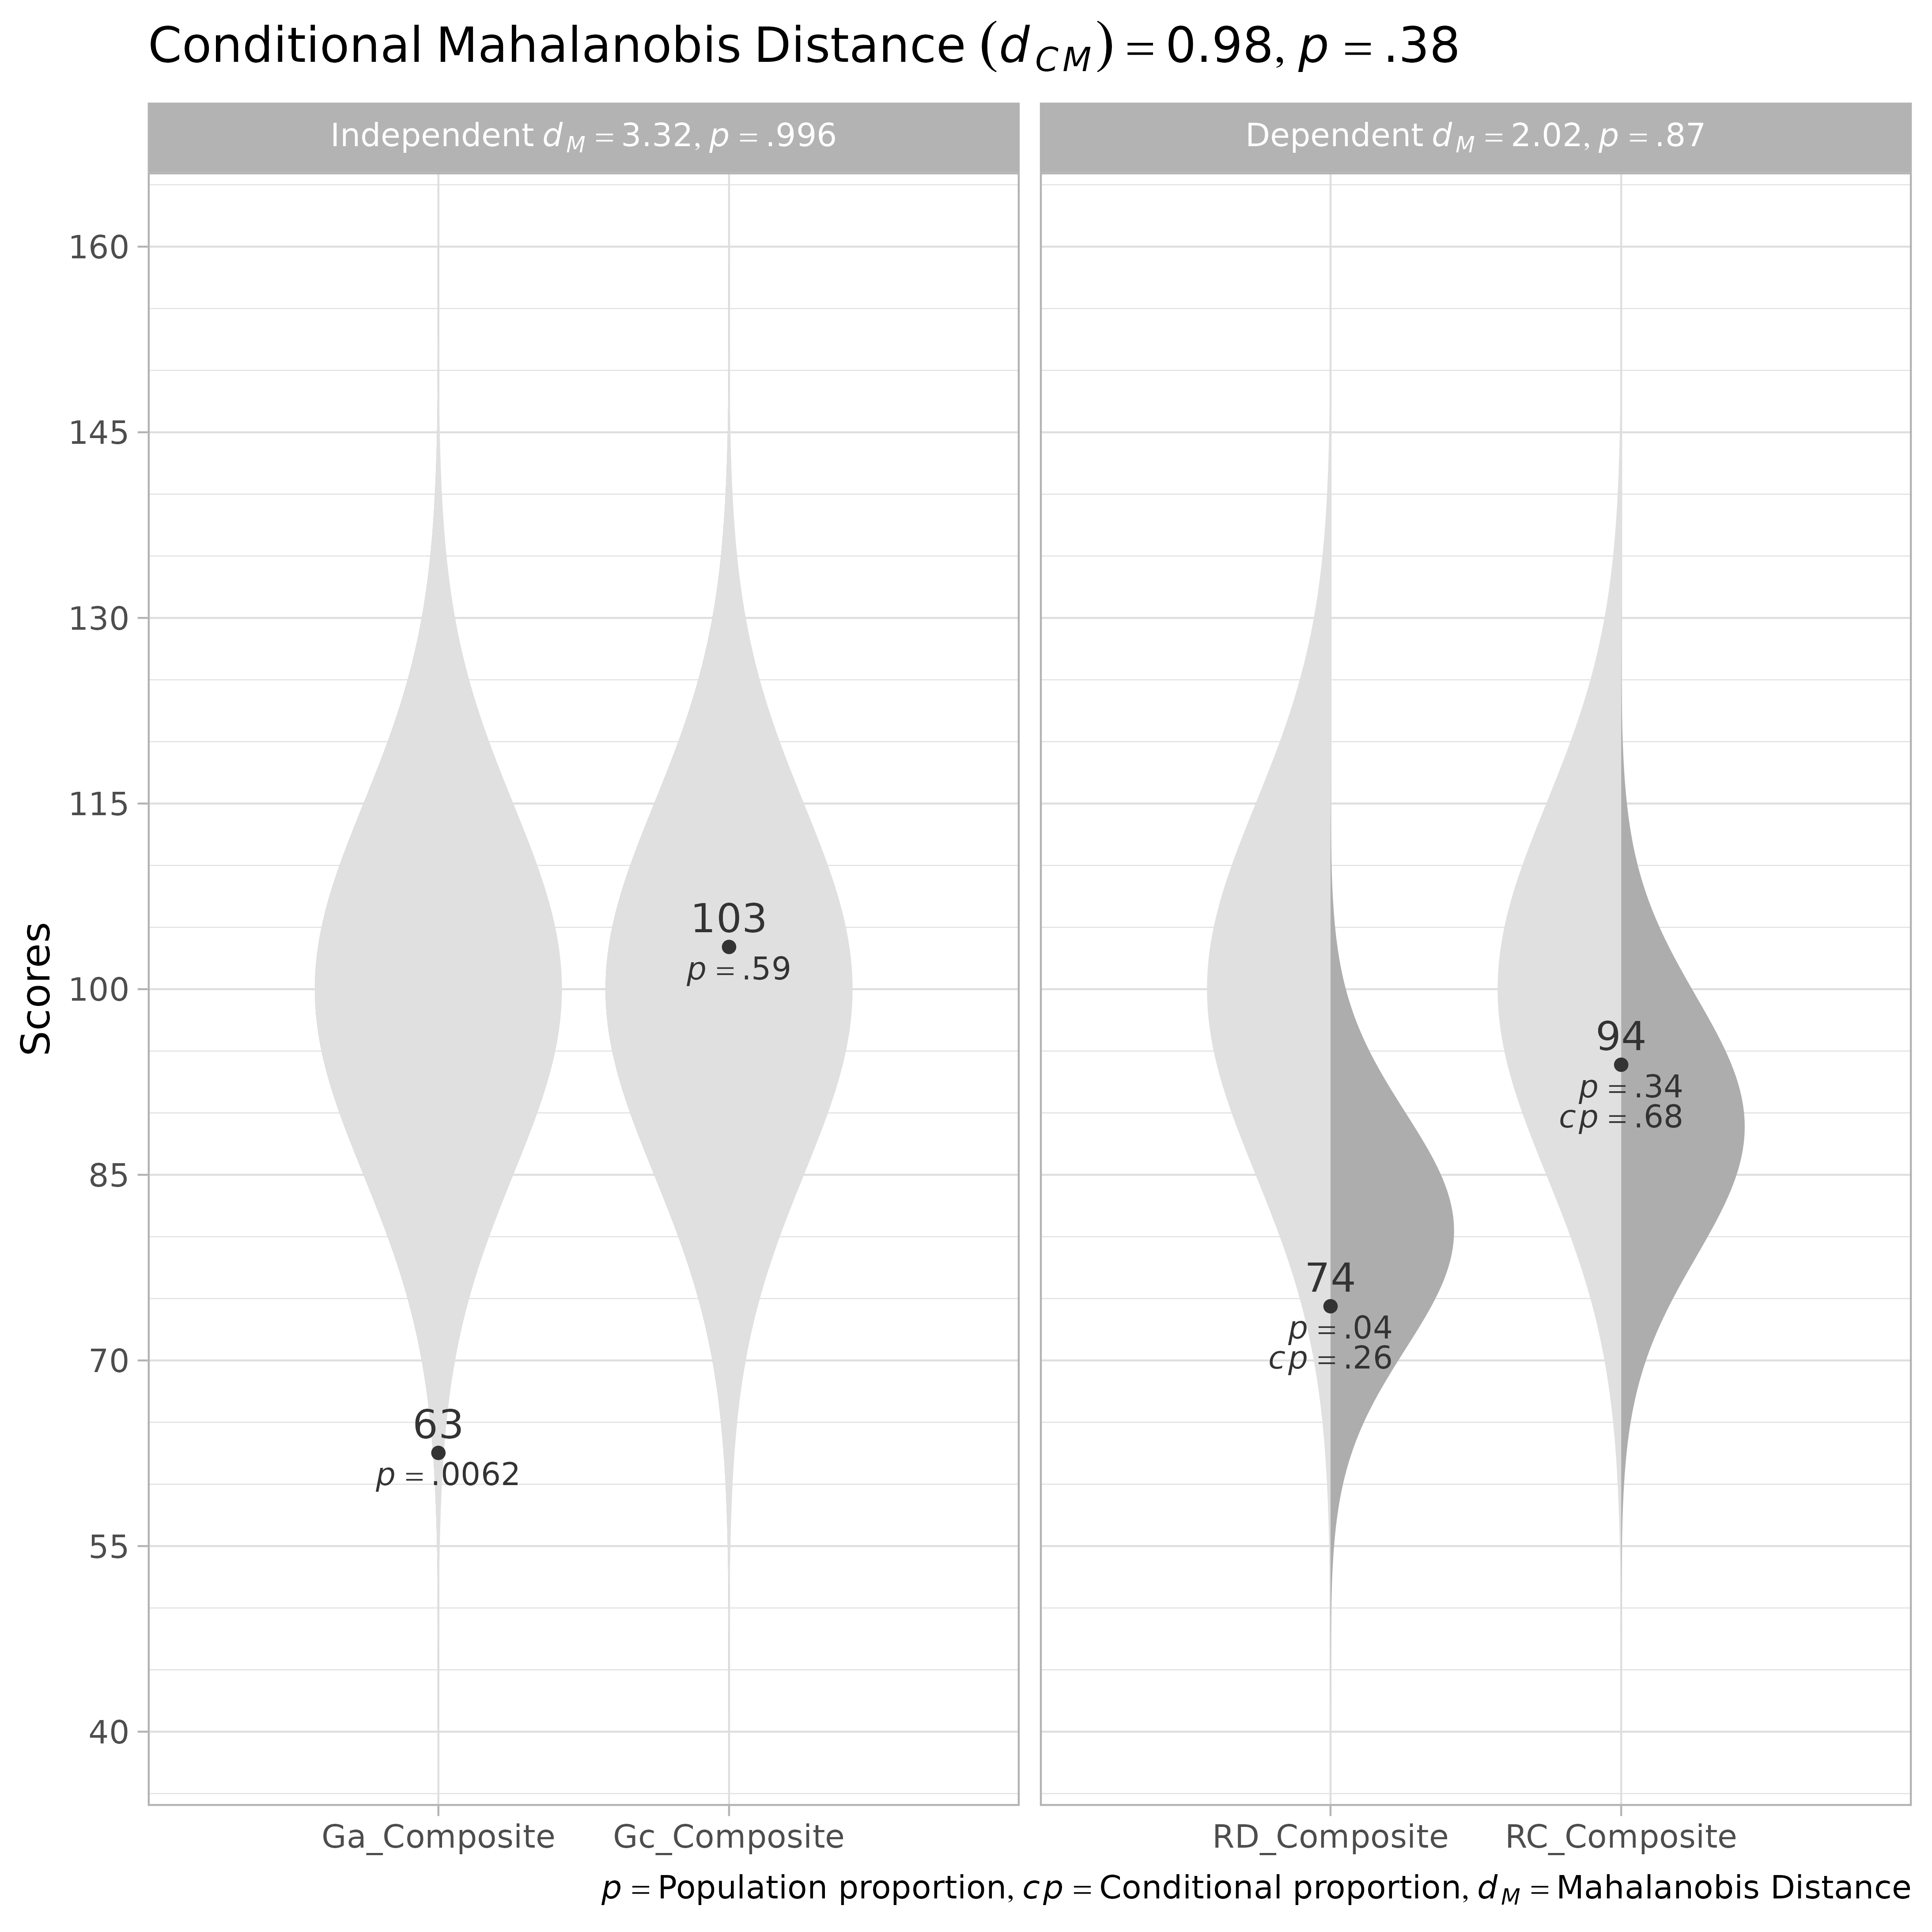 Conditional Distributions for Reading Composites, Controlling for Cognitive Composites